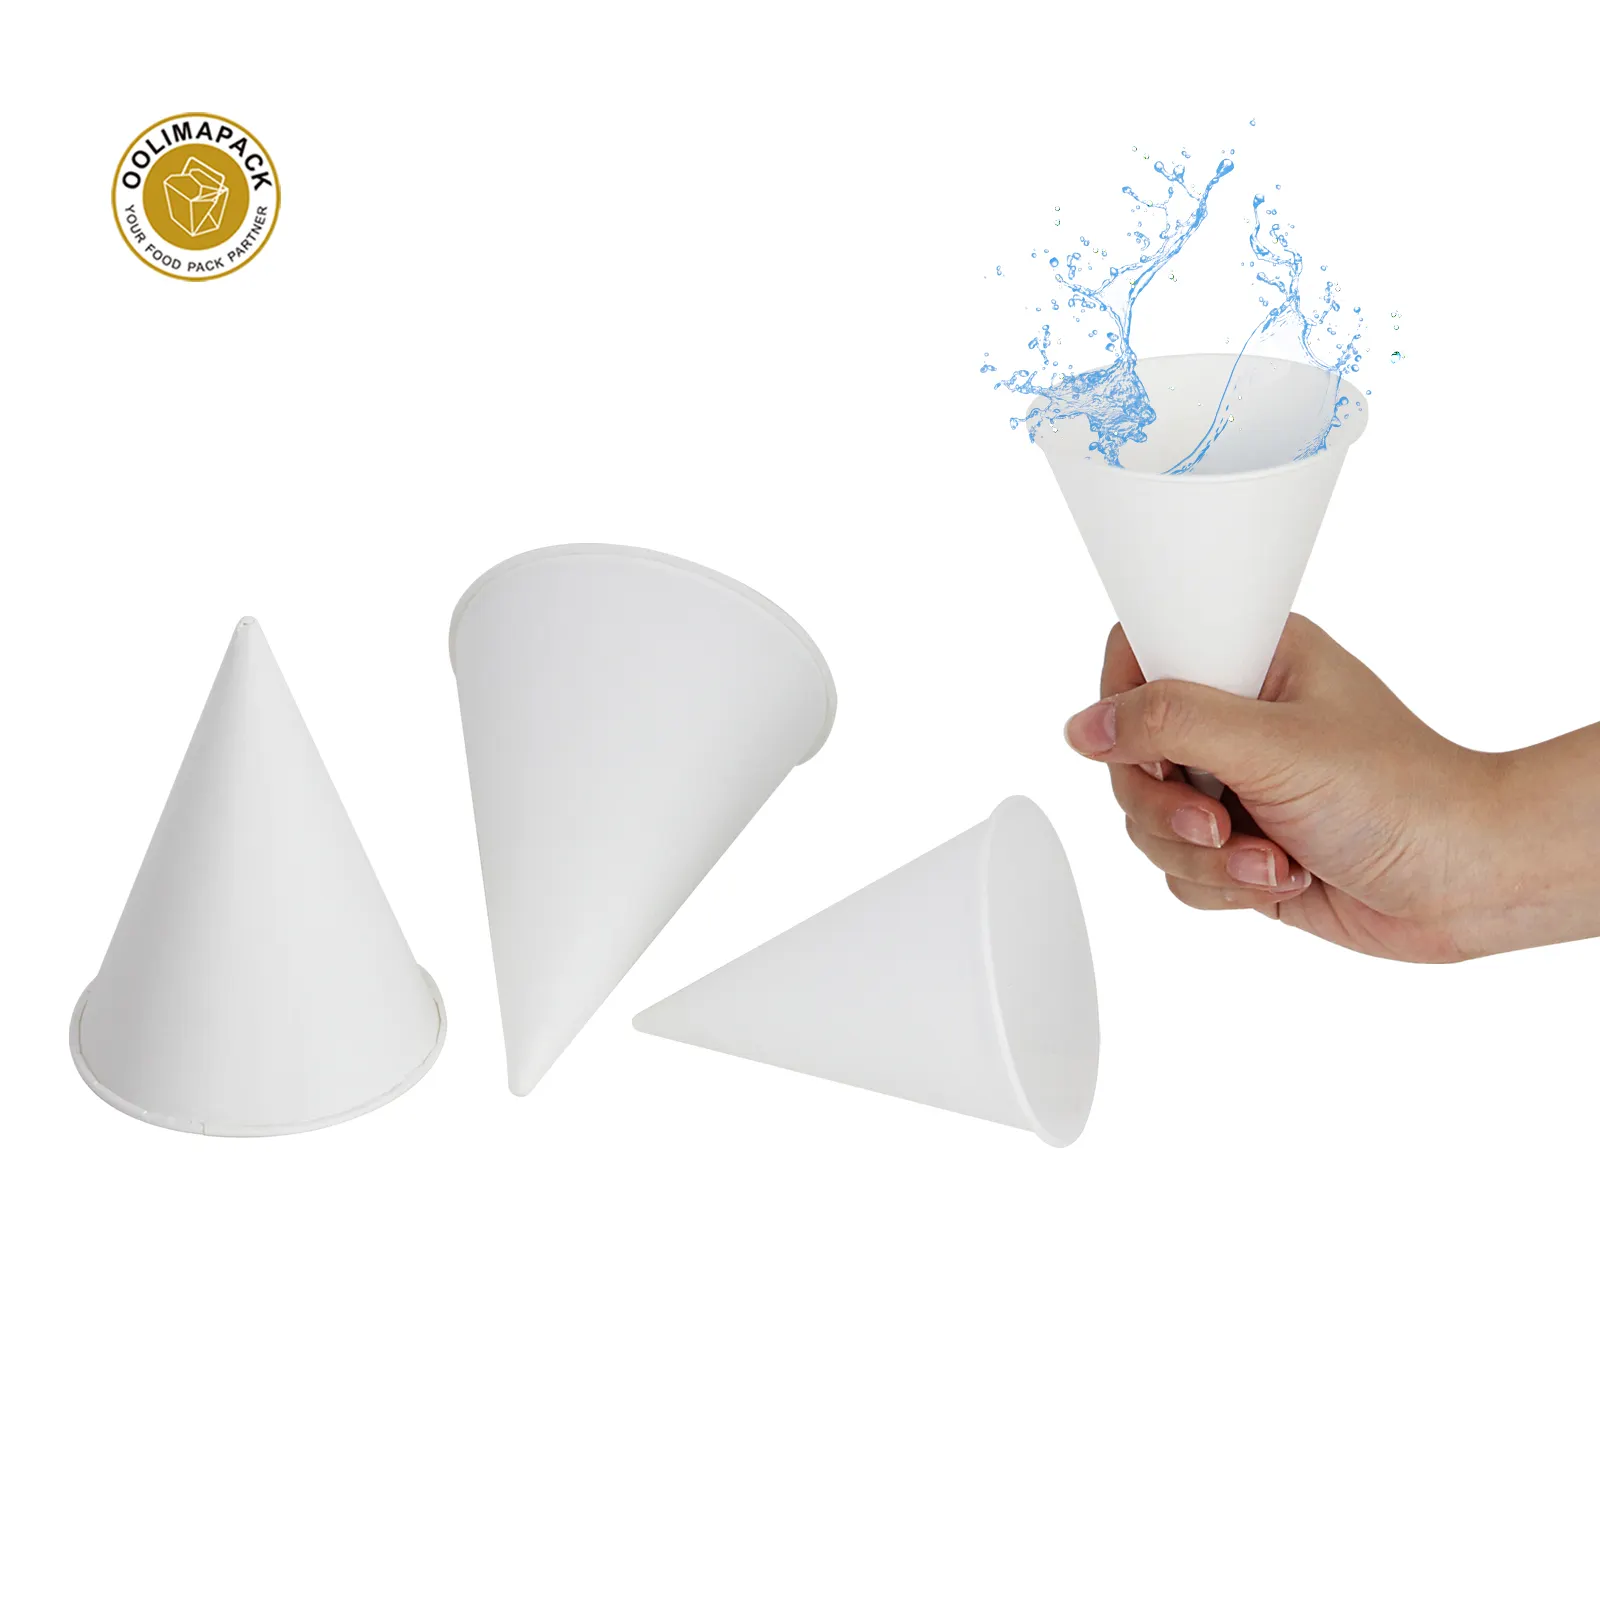 OOLIMA PACK Food Good Material Paper Cone Cup Wholesale Paper Cup